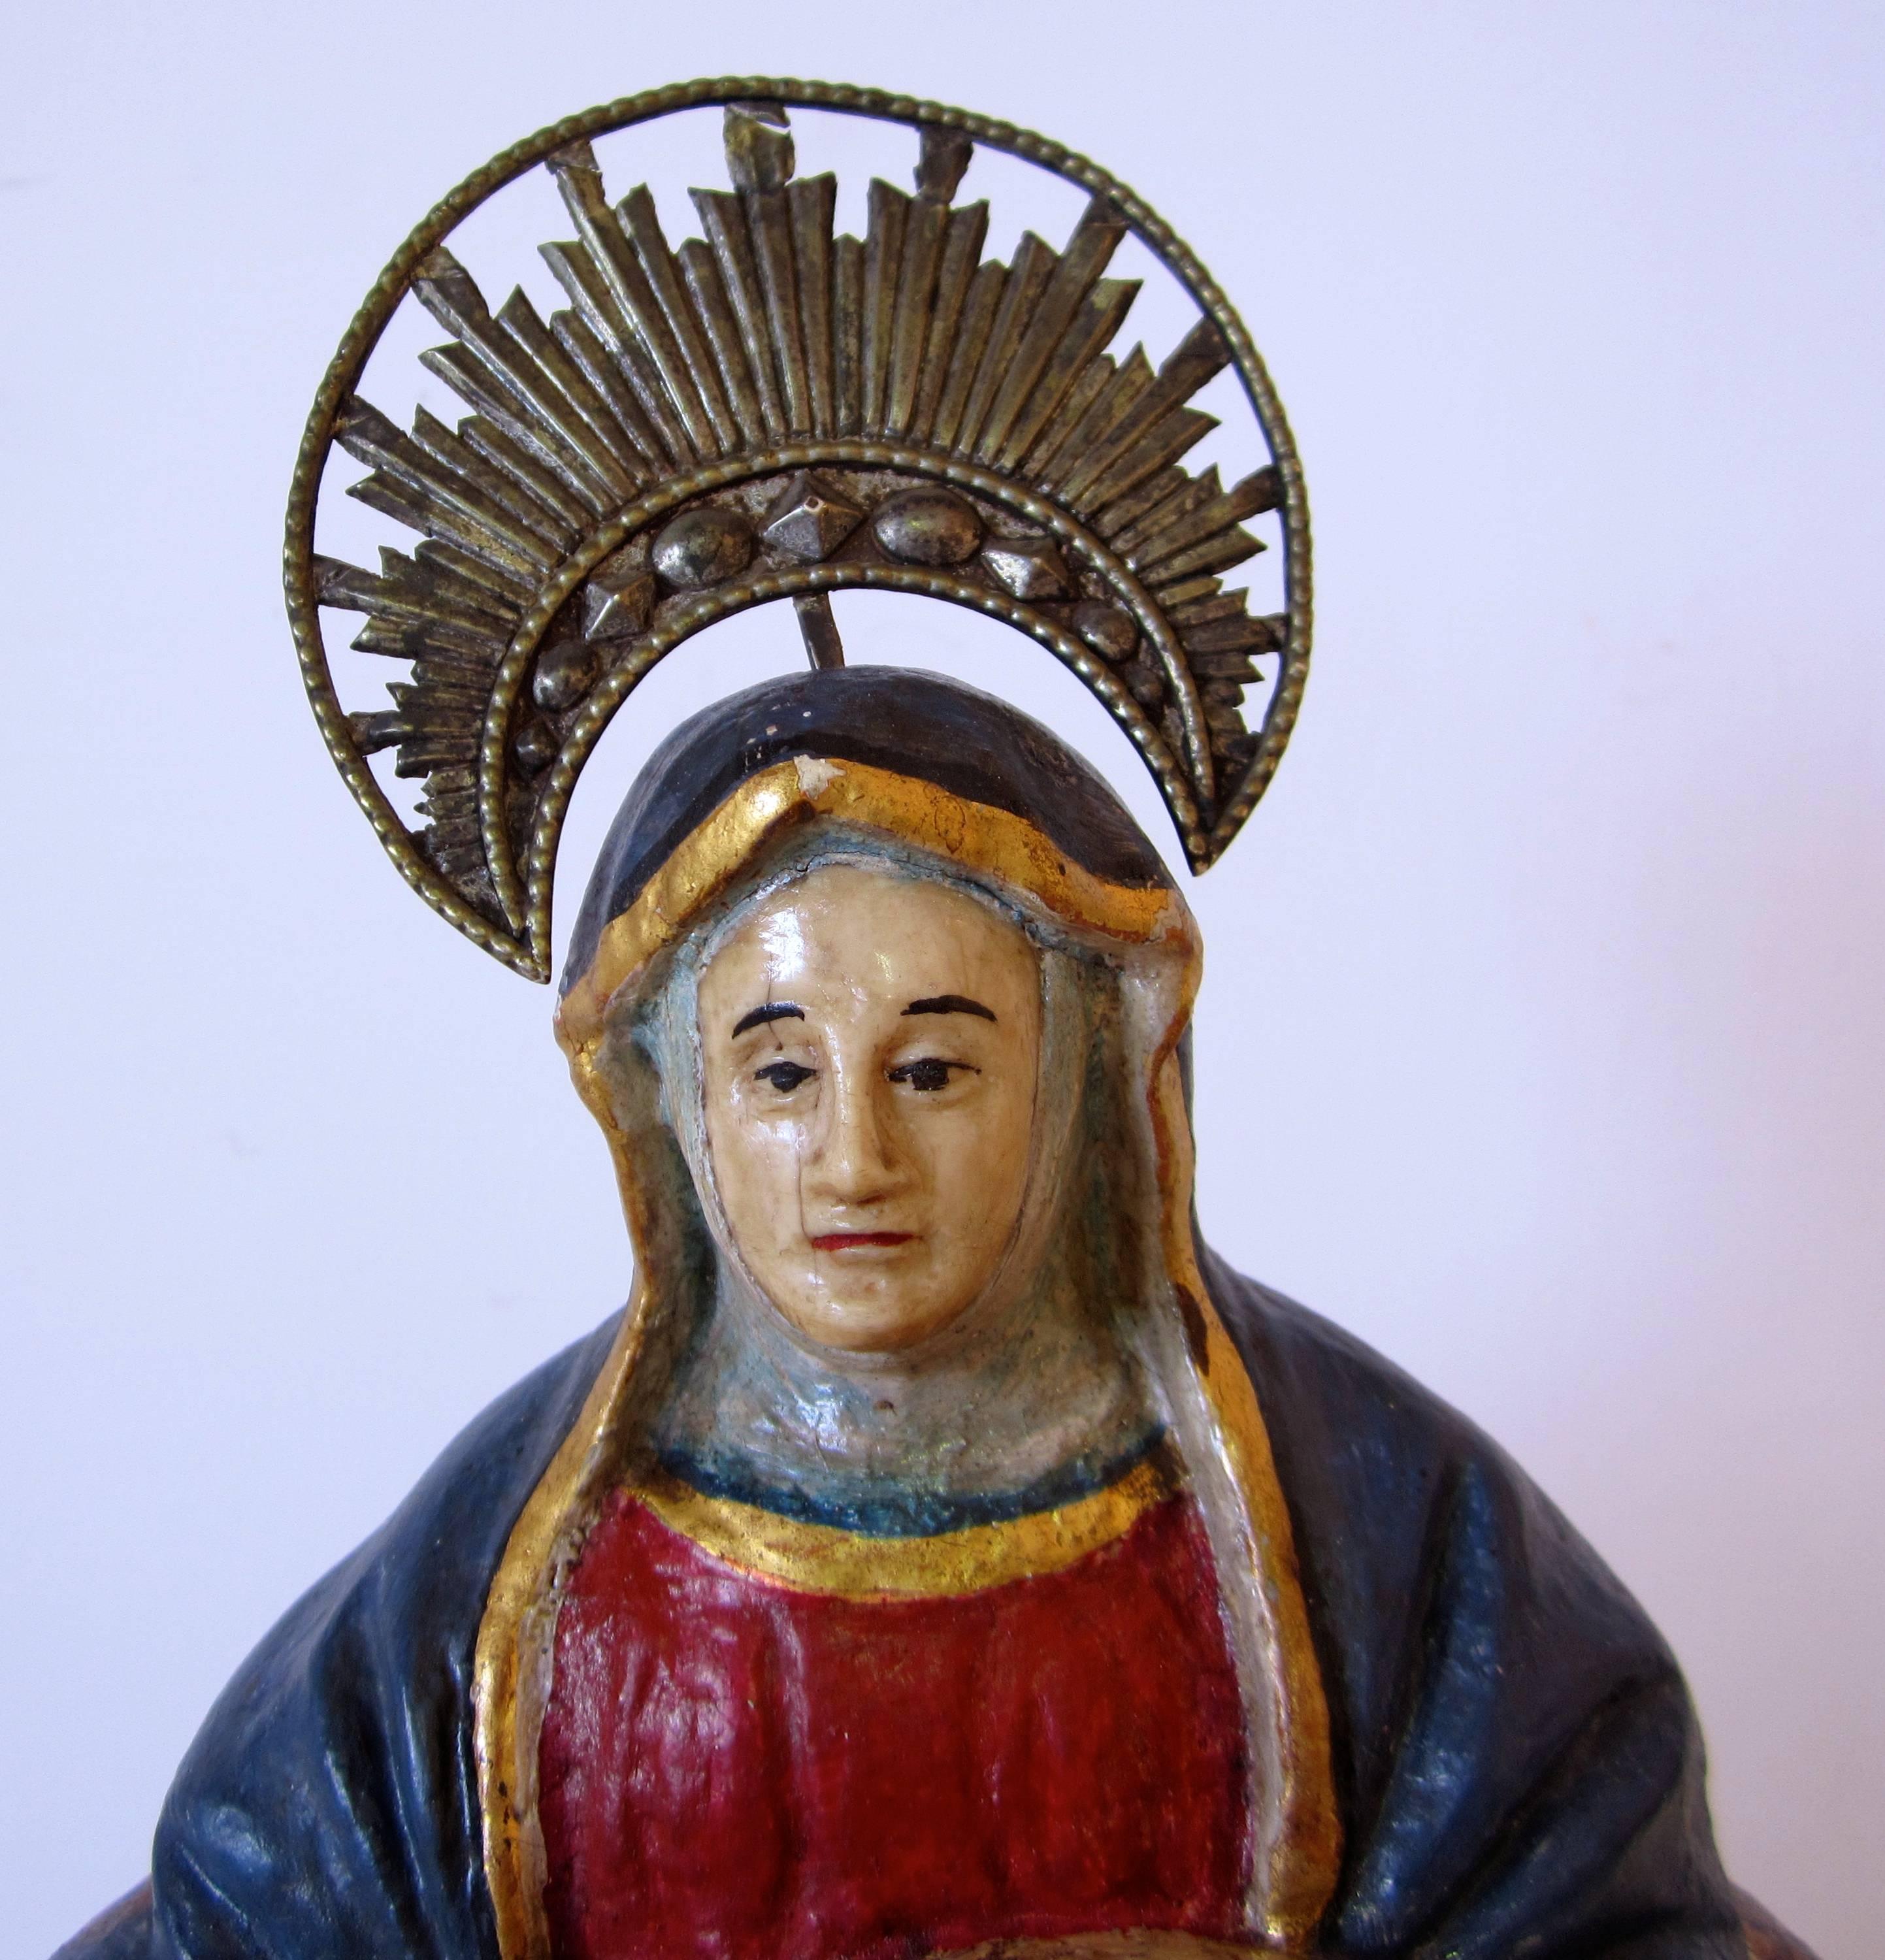 Indo-Portuguese Piedad. The Madonna is holding the dead body of Lord Jesus. Carved, painted and gilded wood with bone face and hands of the Lady Mary, silver cross, Goa, 18th century.